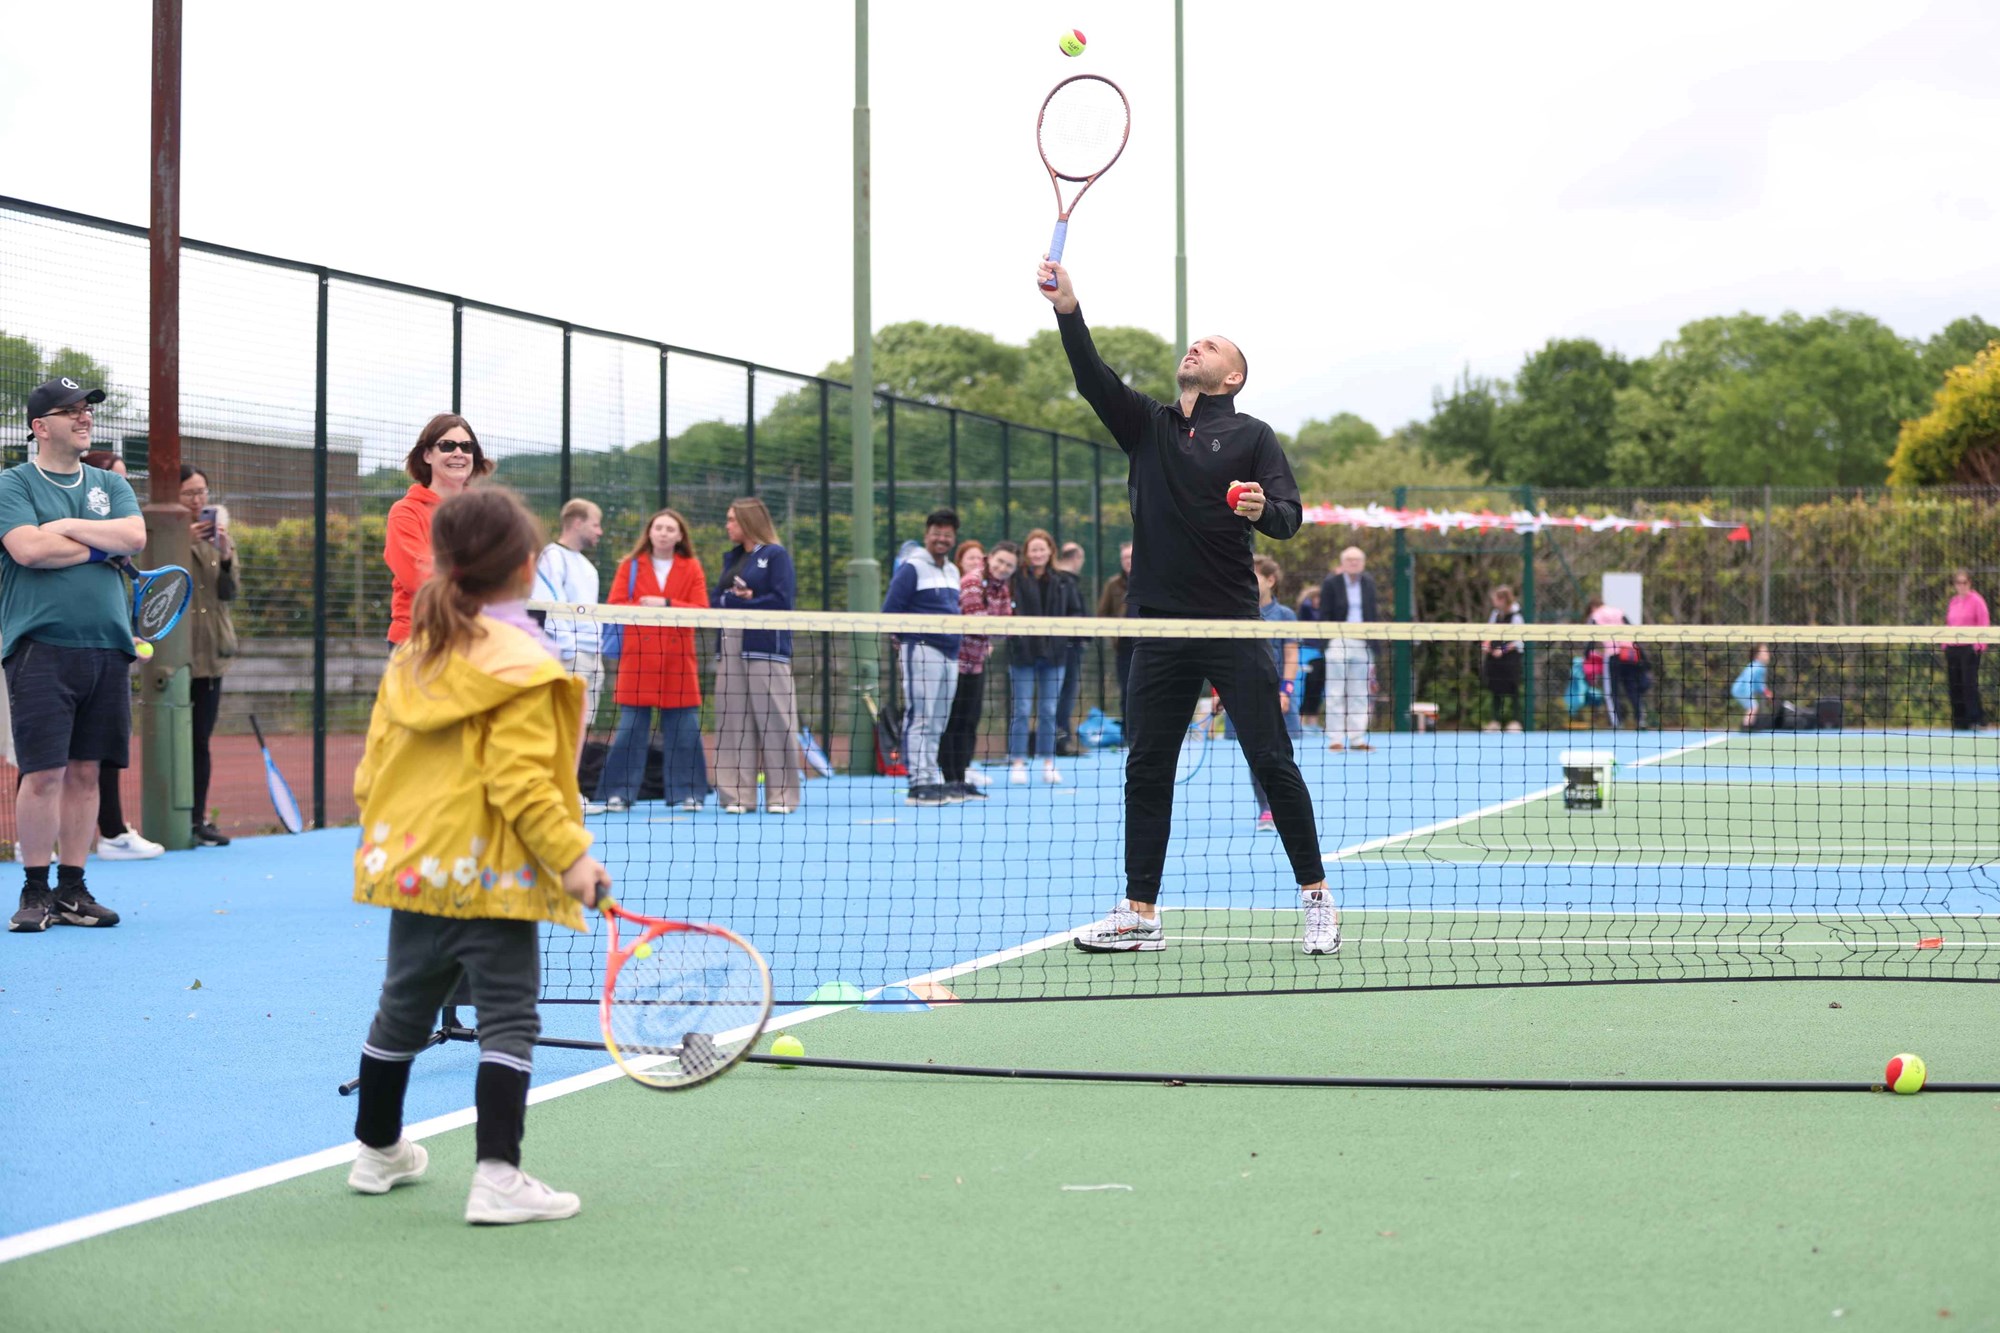 Dan Evans playing tennis with a young girl on a park tennis court